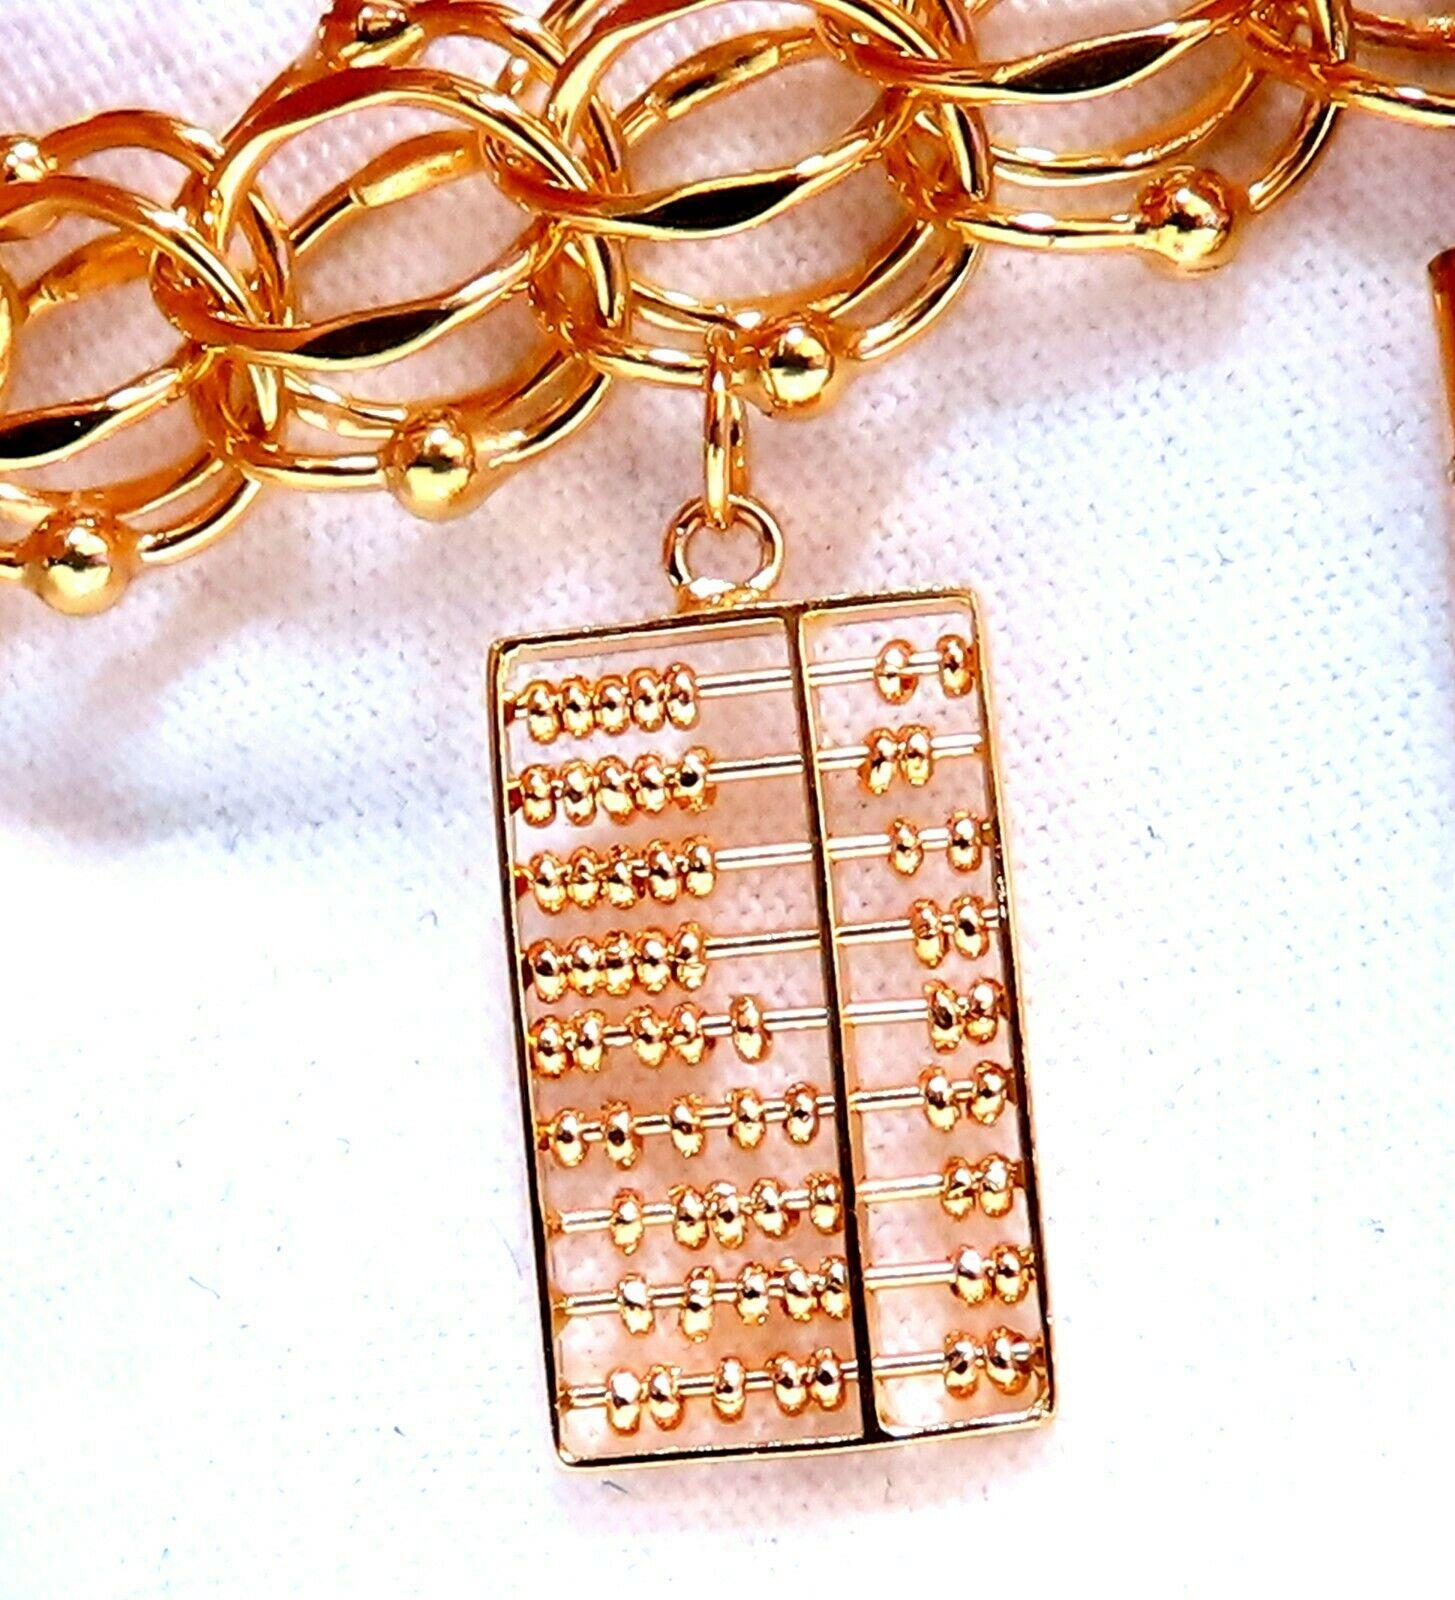 Nine Charms Link Bracelet 14kt Gold 54gm In New Condition For Sale In New York, NY